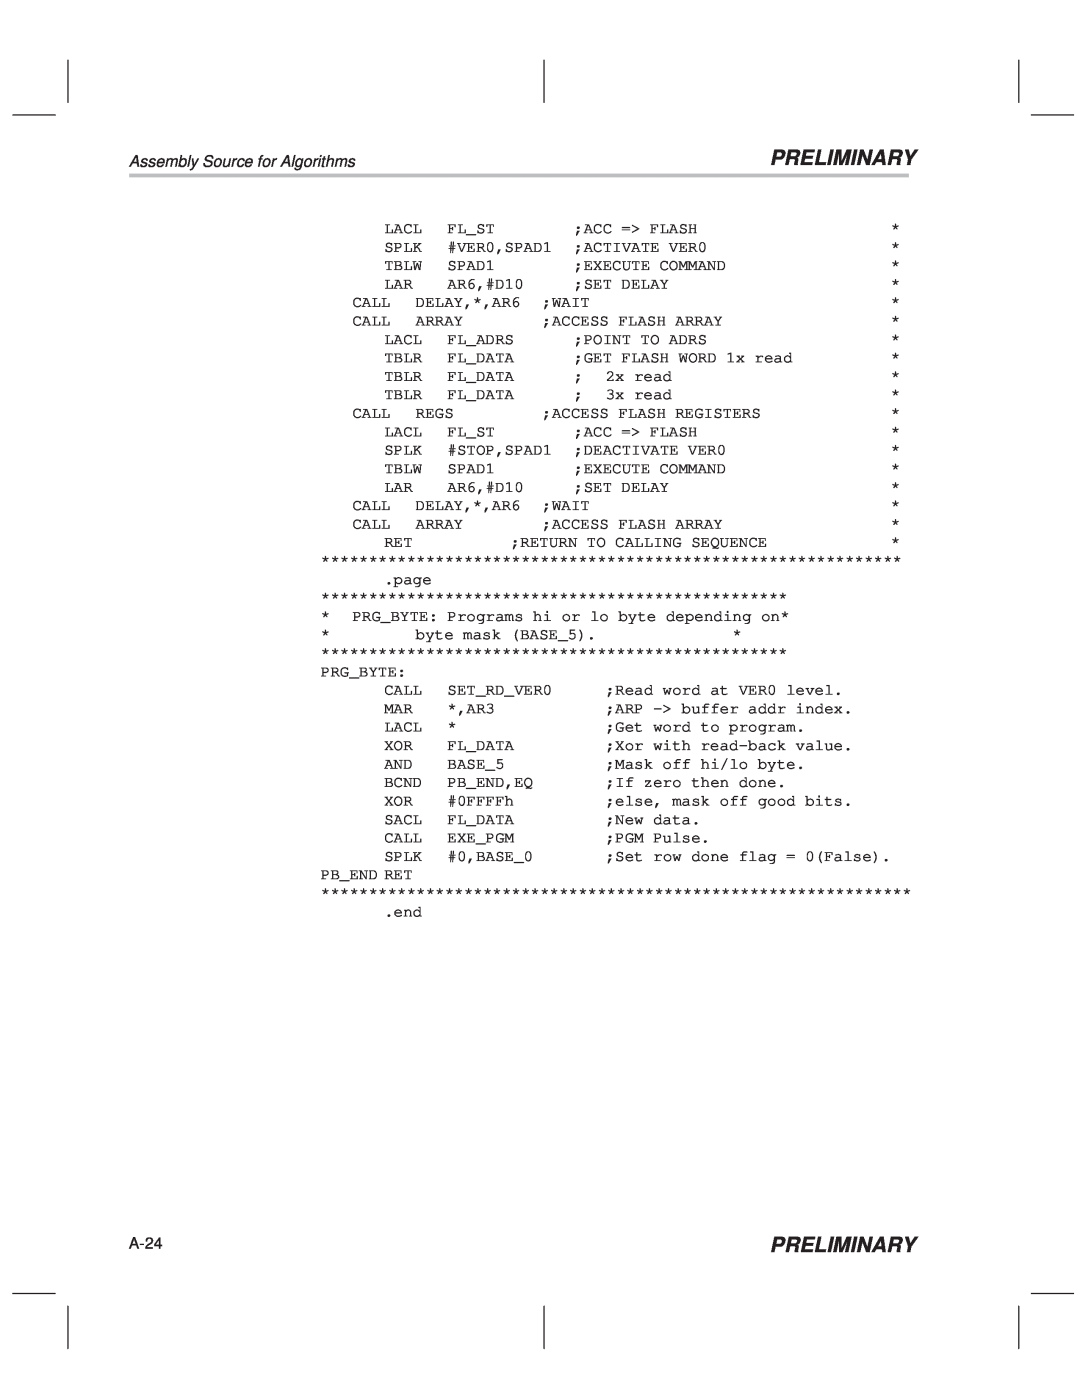 Texas Instruments TMS320F20x/F24x DSP manual Preliminary, Assembly Source for Algorithms, A-24 